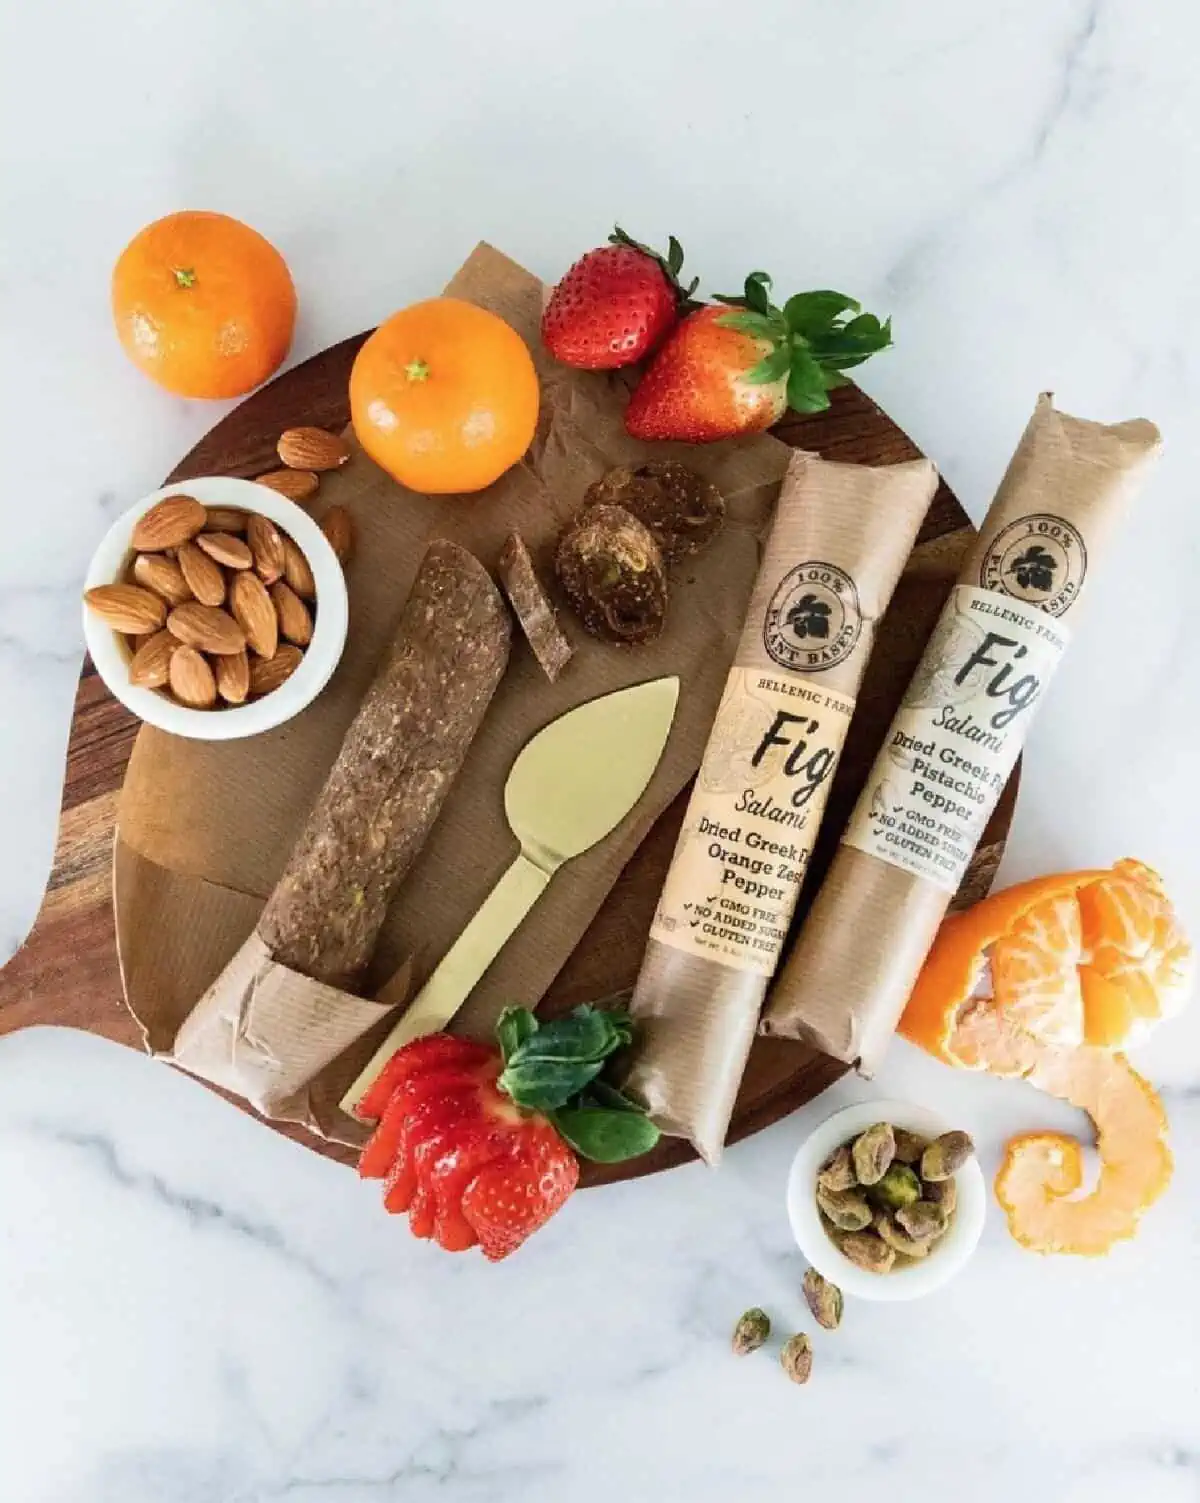 A wooden charcuterie board on the white background displaying various fruits, bowls of nuts, and two flavors of Hellenic Farms vegan fig salami.